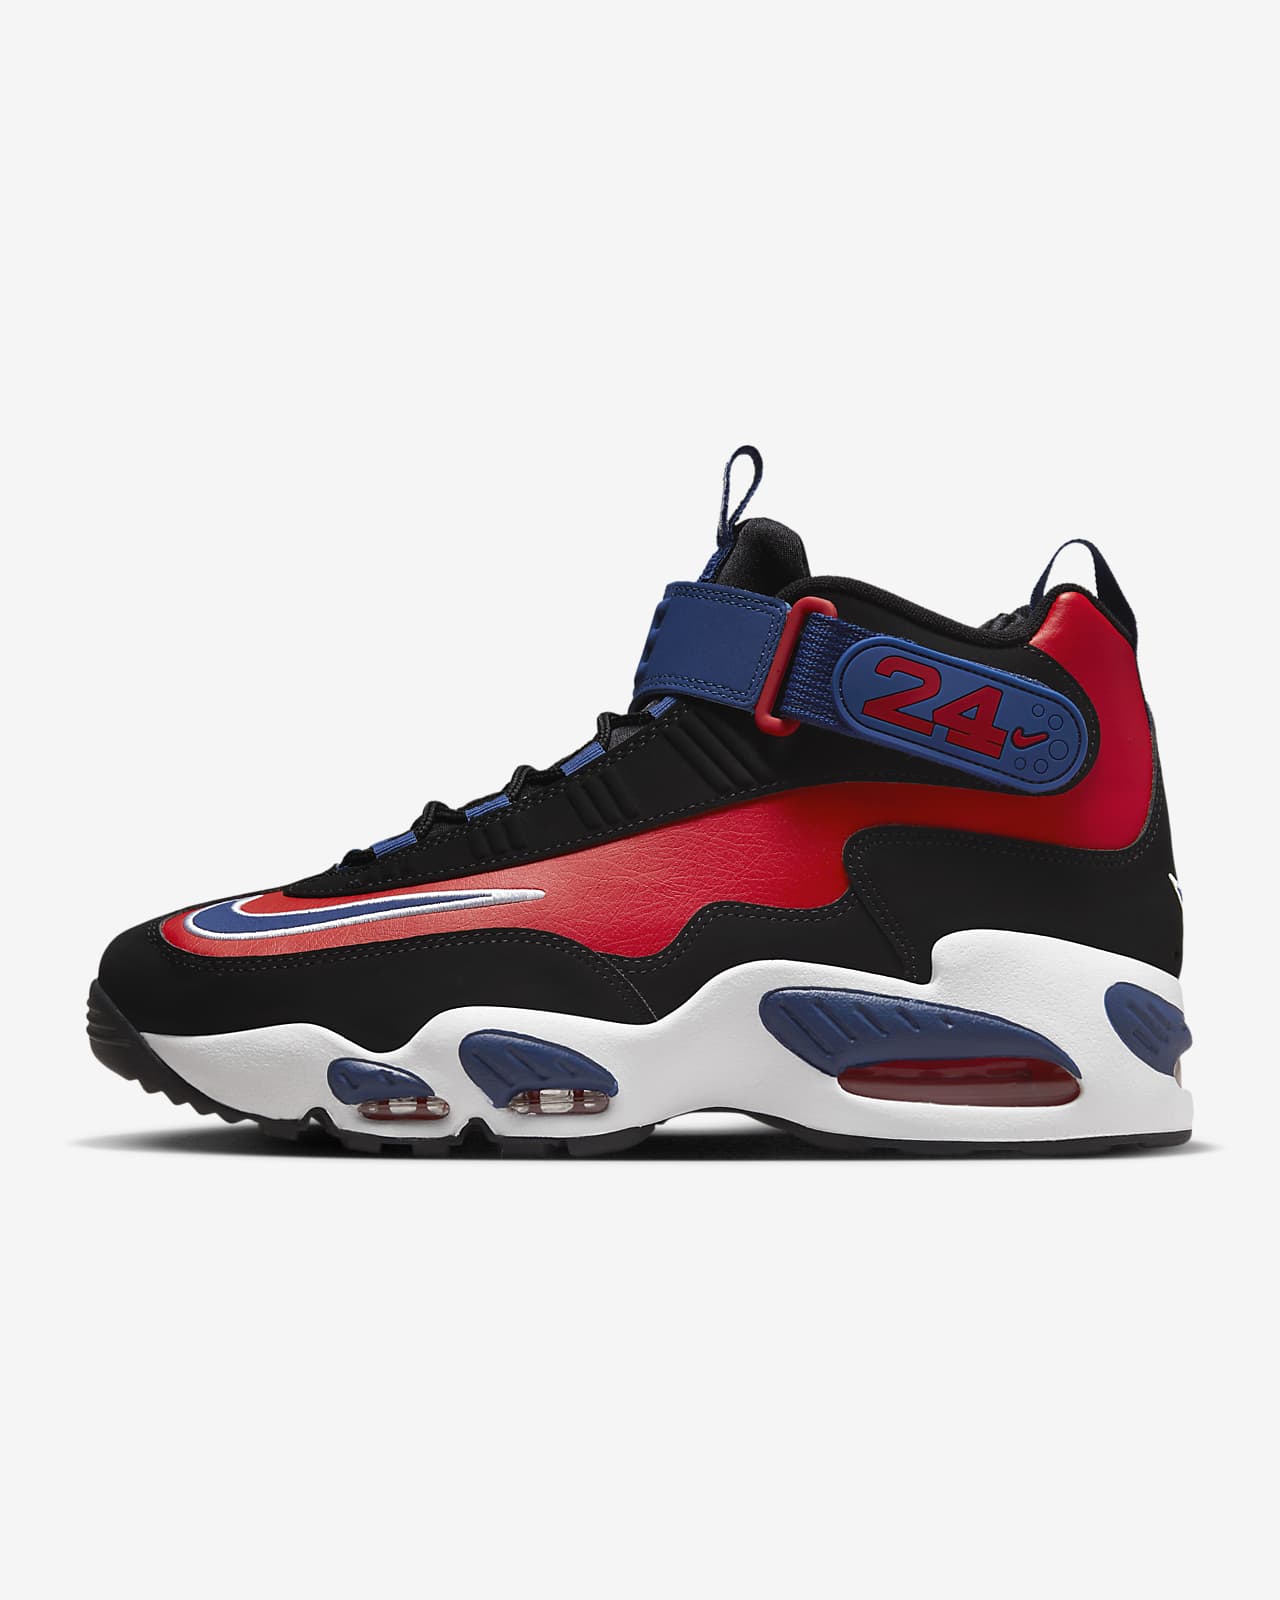 suitcase courage morale Nike Air Griffey Max 1 Men's Shoes. Nike.com